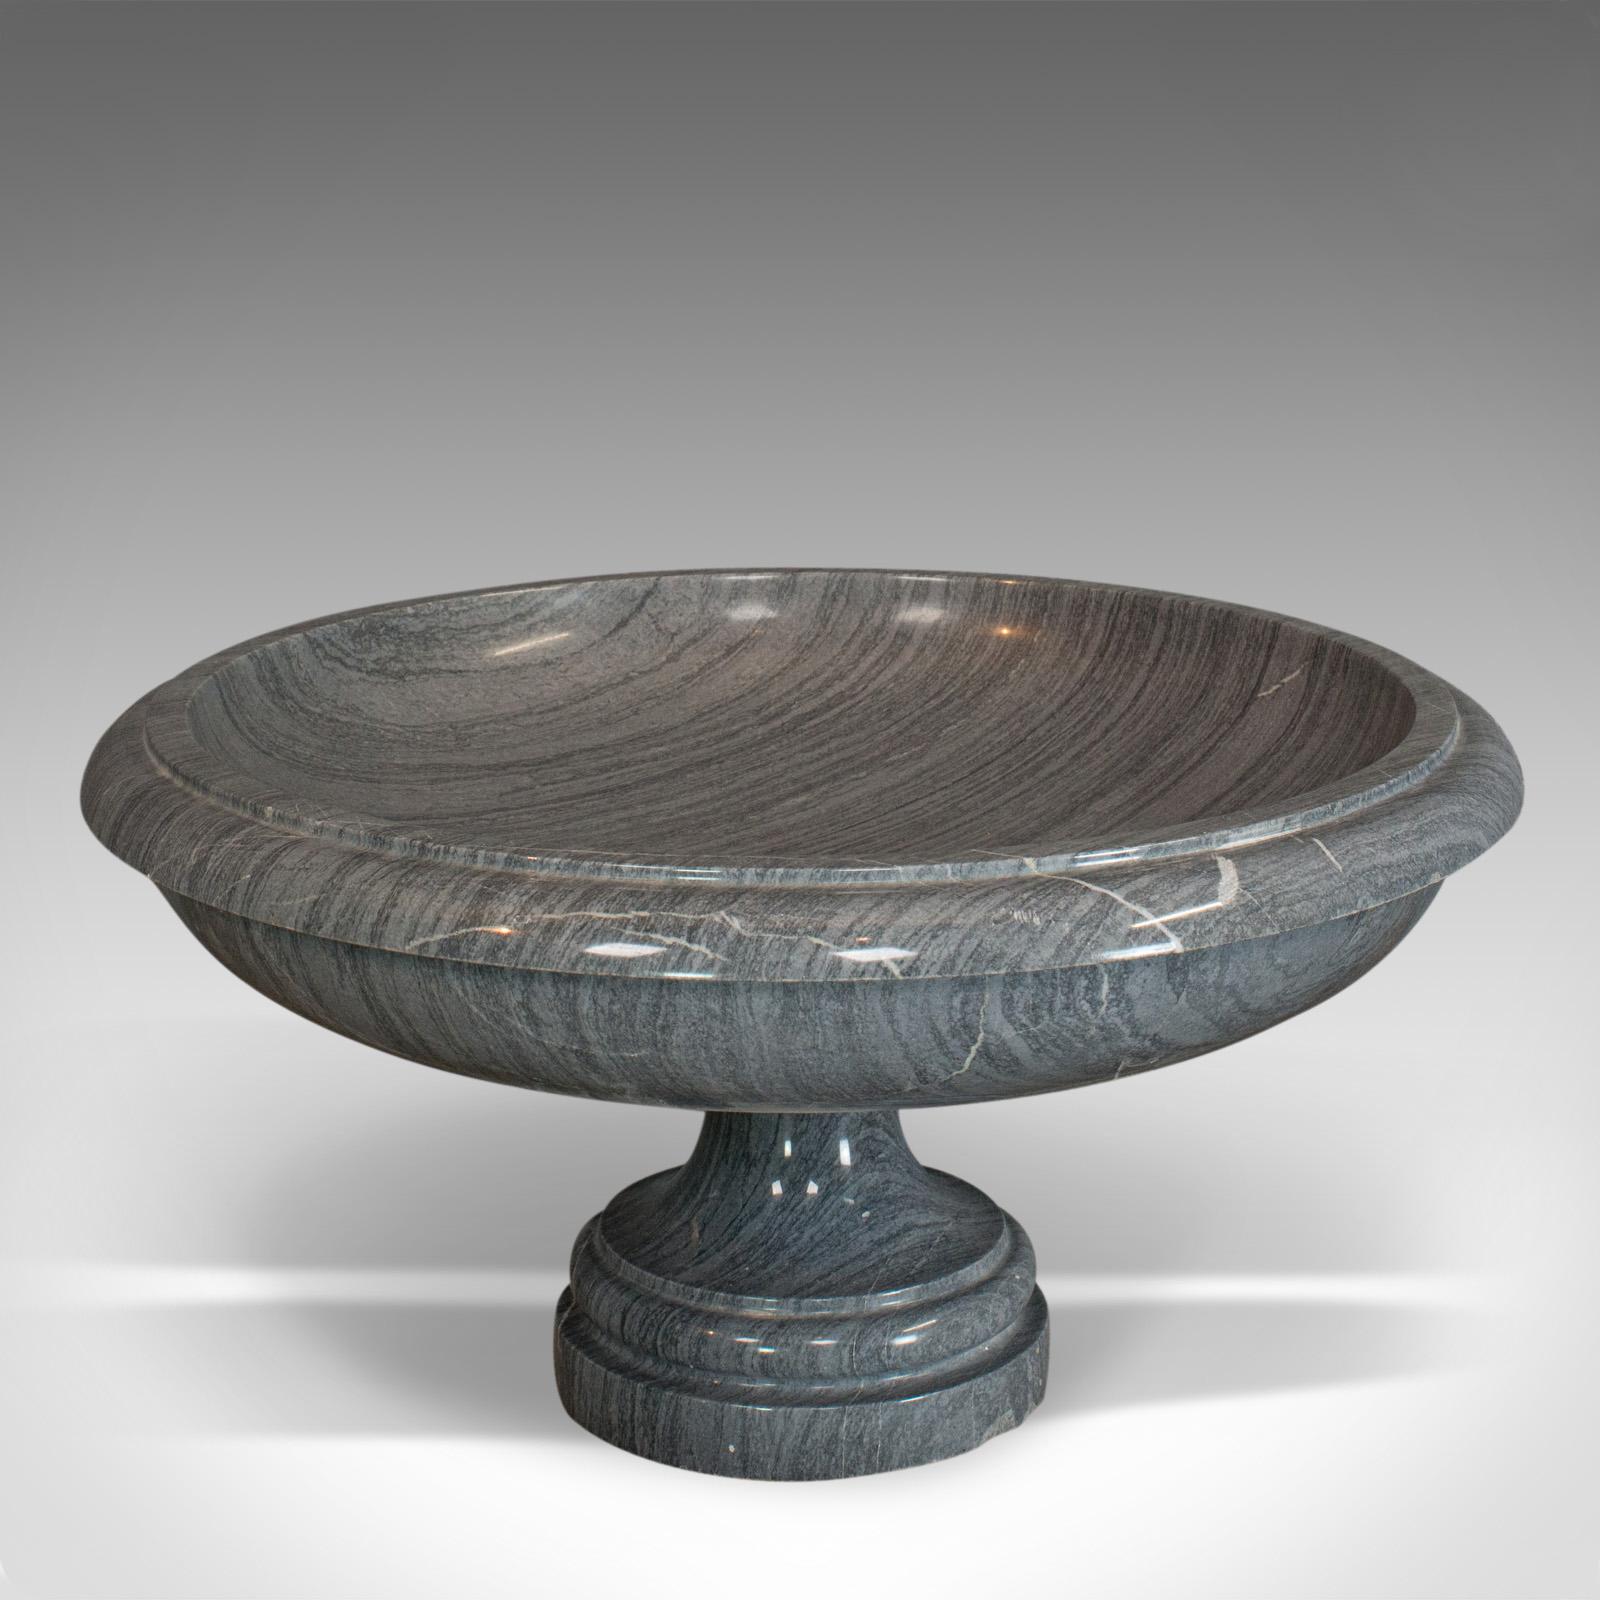 This is a vintage fruit bowl. An English, platinum striata marble ornamental serving dish, dating to the late 20th century.

Elegant dish with stunning marble veins
Displays a desirable aged patina
Eye-catching dark grey marble